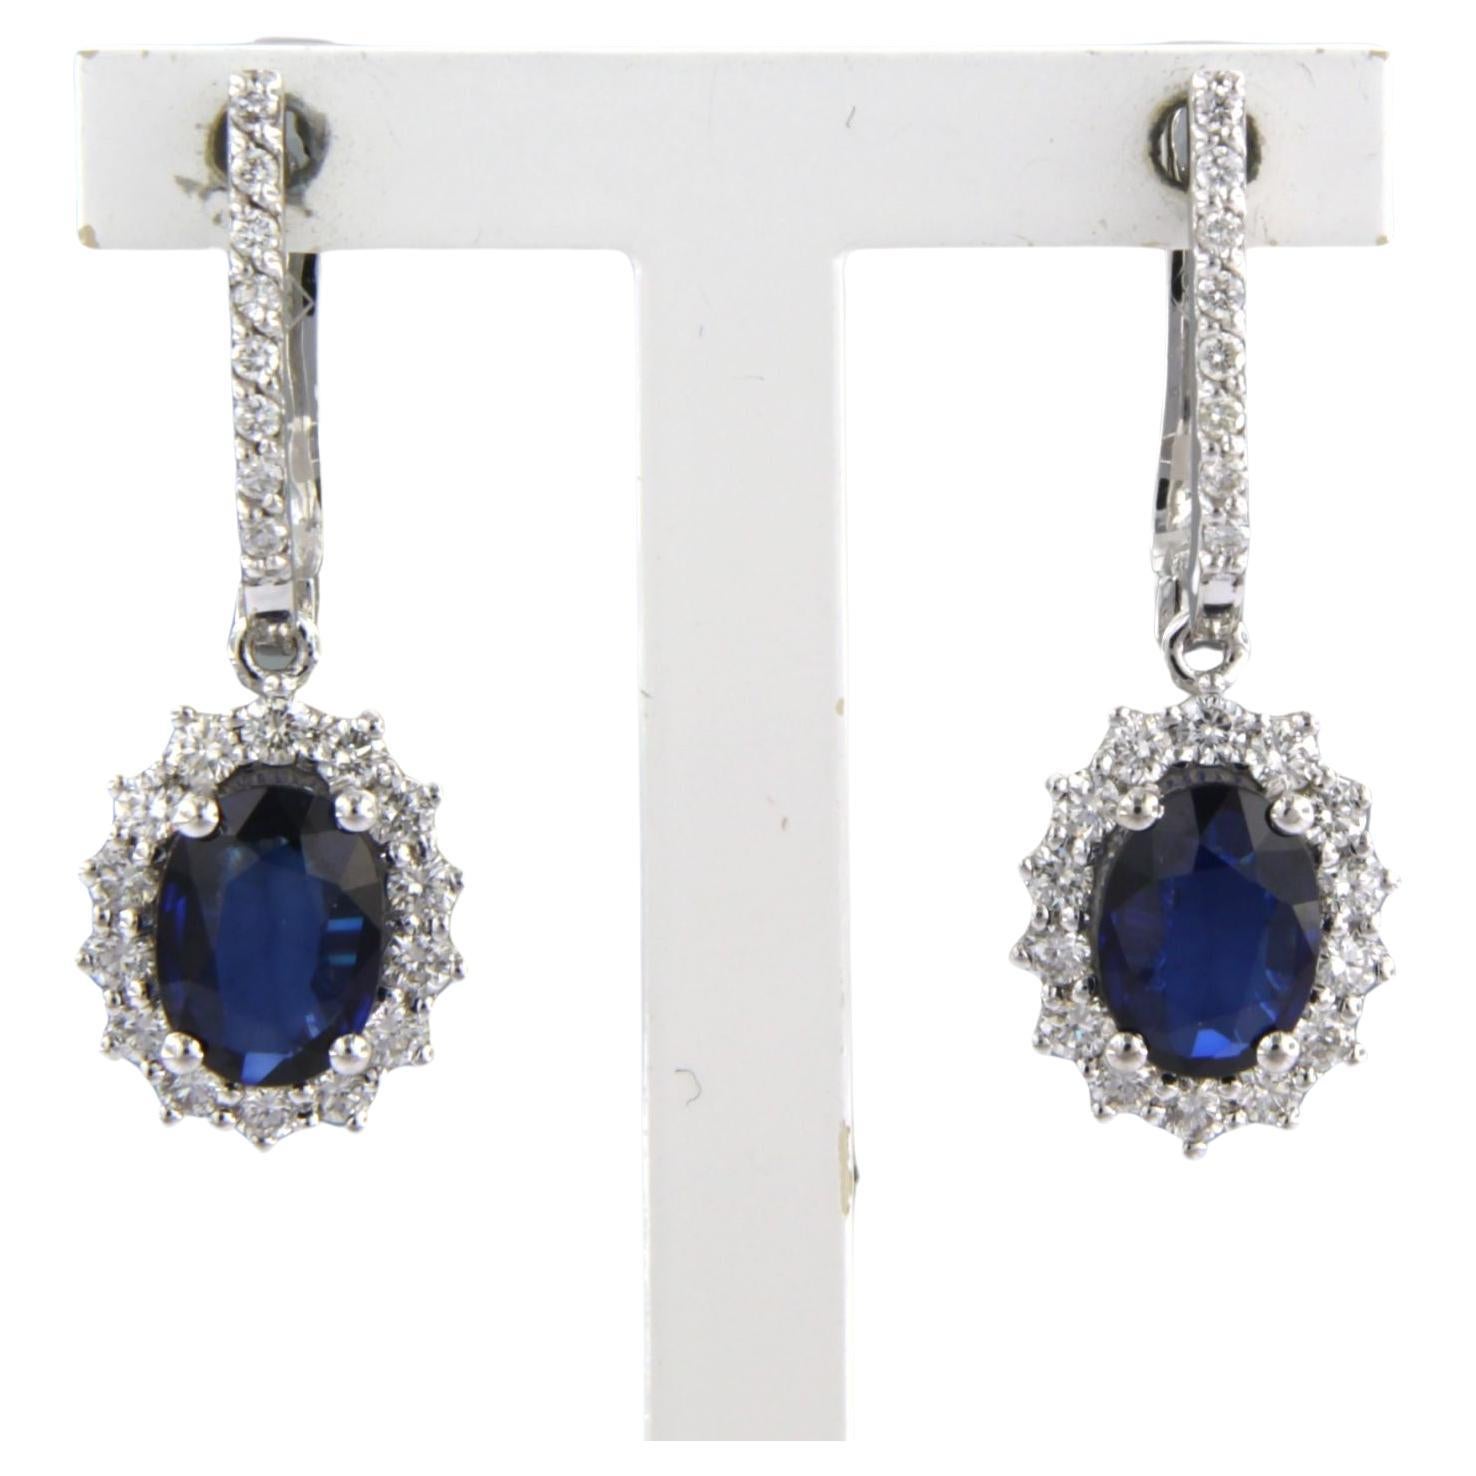 Earring set with sapphire and diamonds 18k white gold